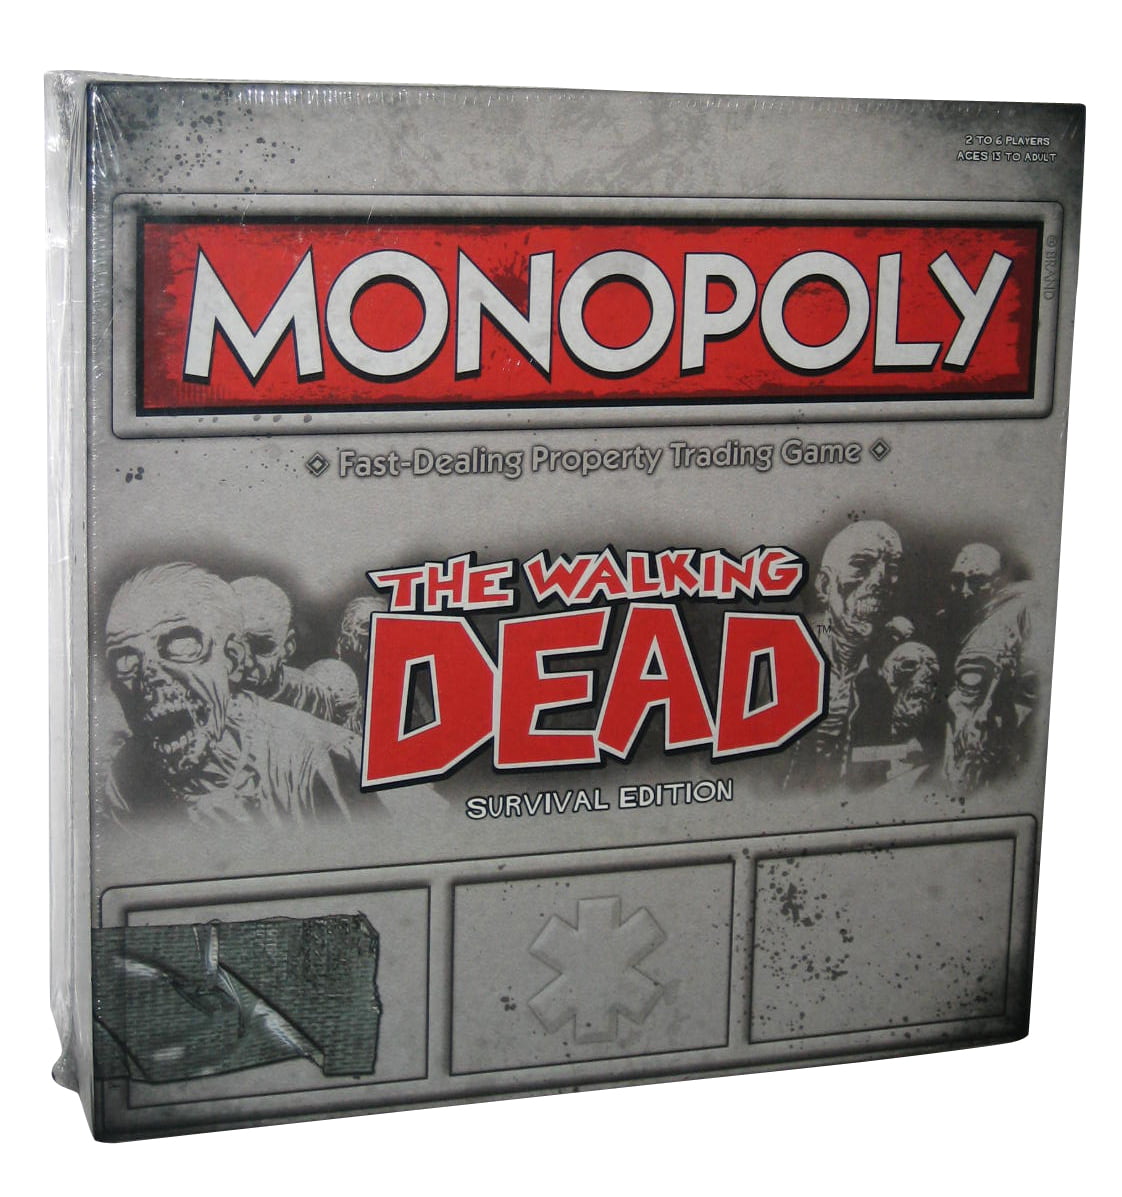 The Walking Dead Survival Edition Monopoly Board Game